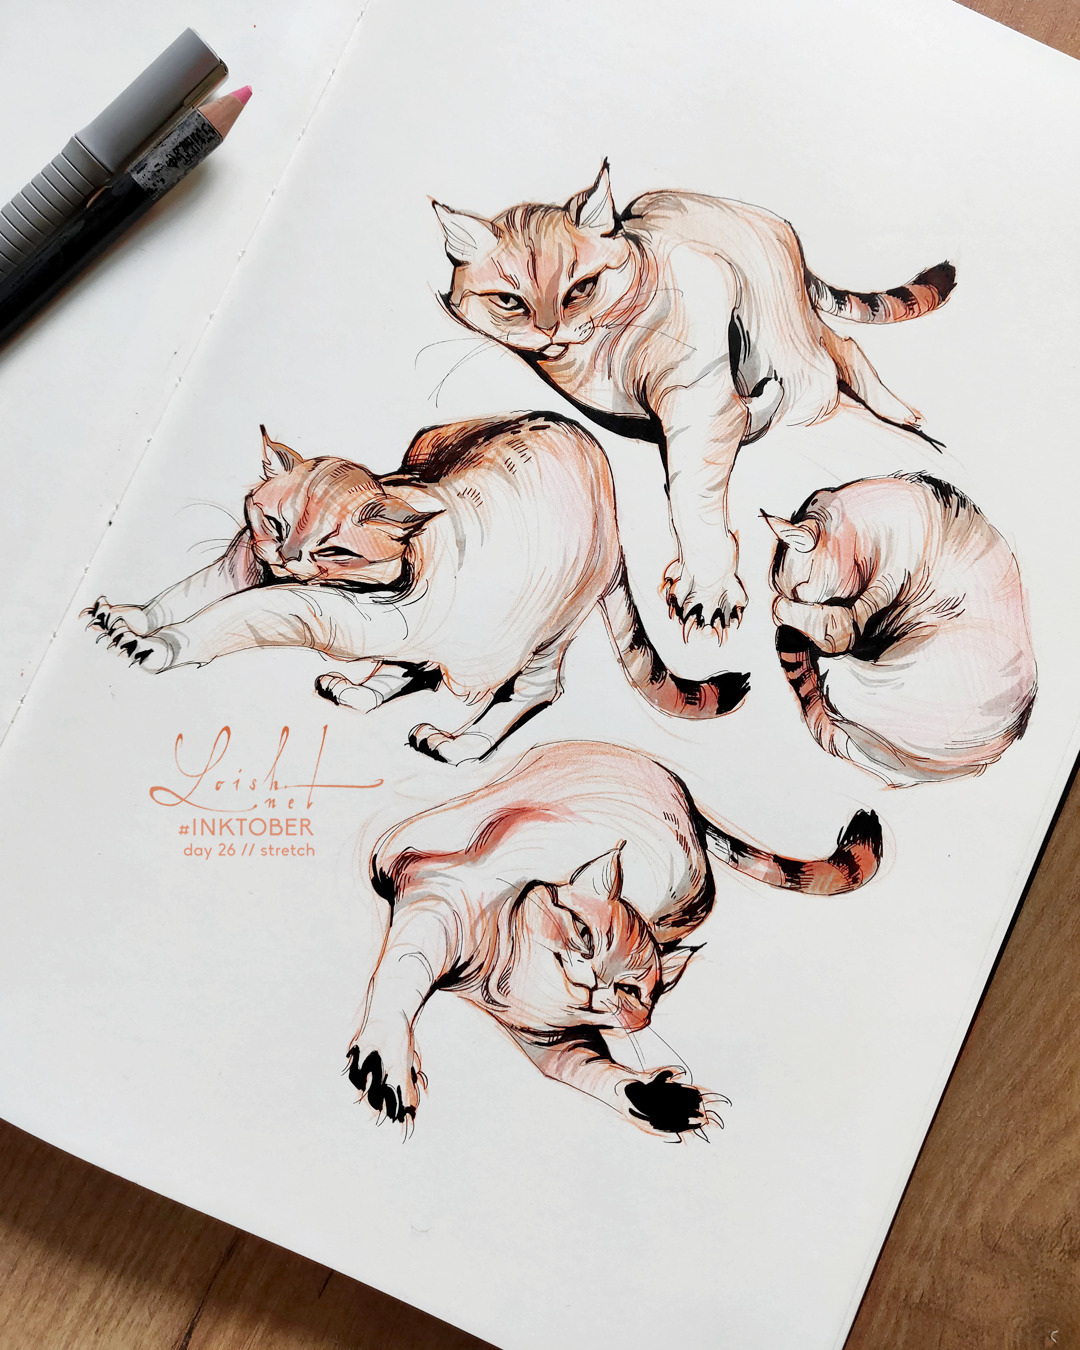 loish:  inktober sketches featuring my kitty. sadly she passed away shortly after